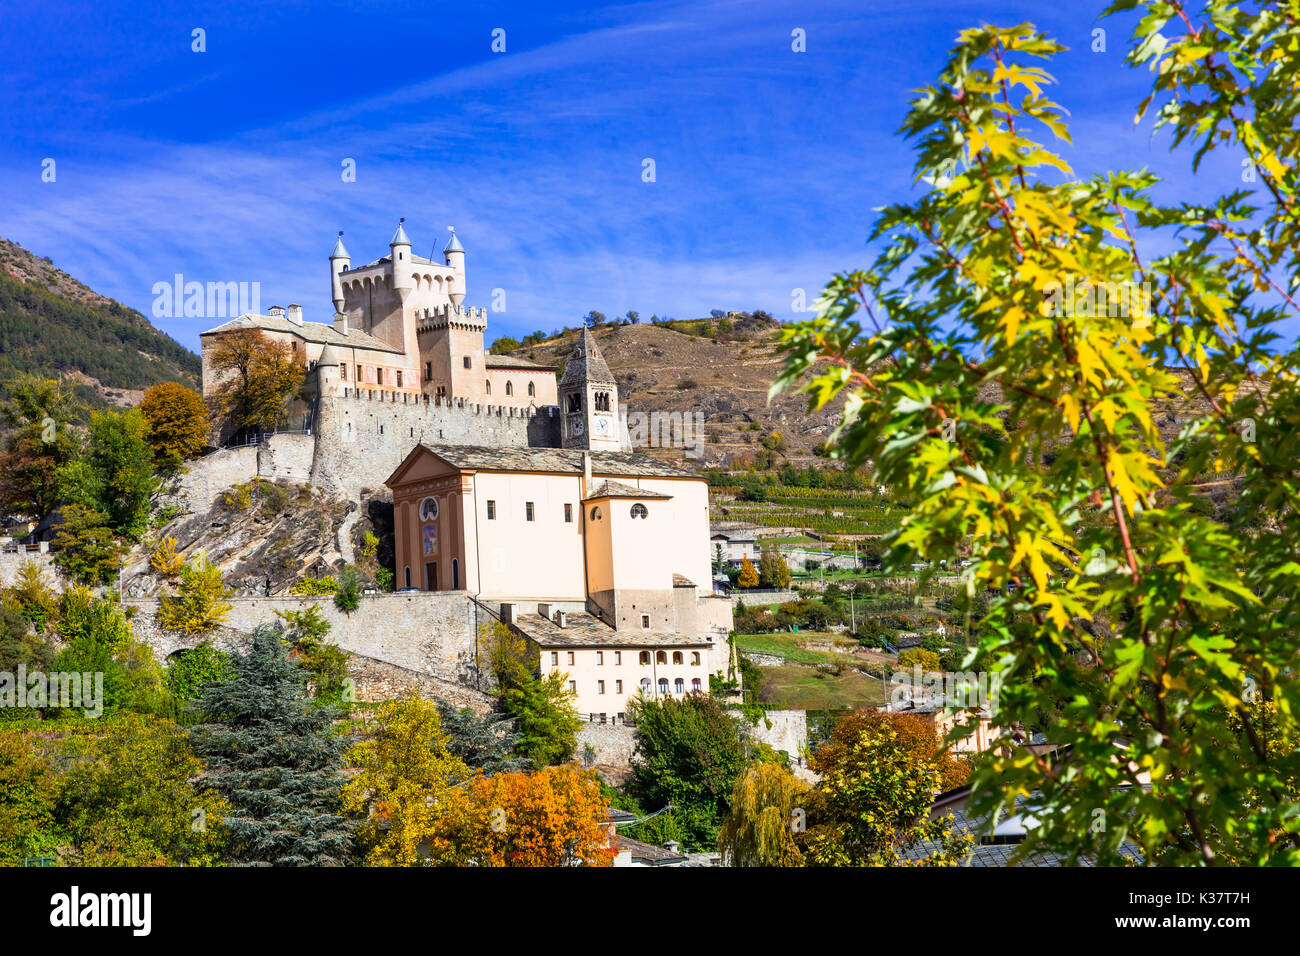 Beautiful Saint-Pierre castle,panoramic view,Valle d'Aosta,Italy. Stock Photo